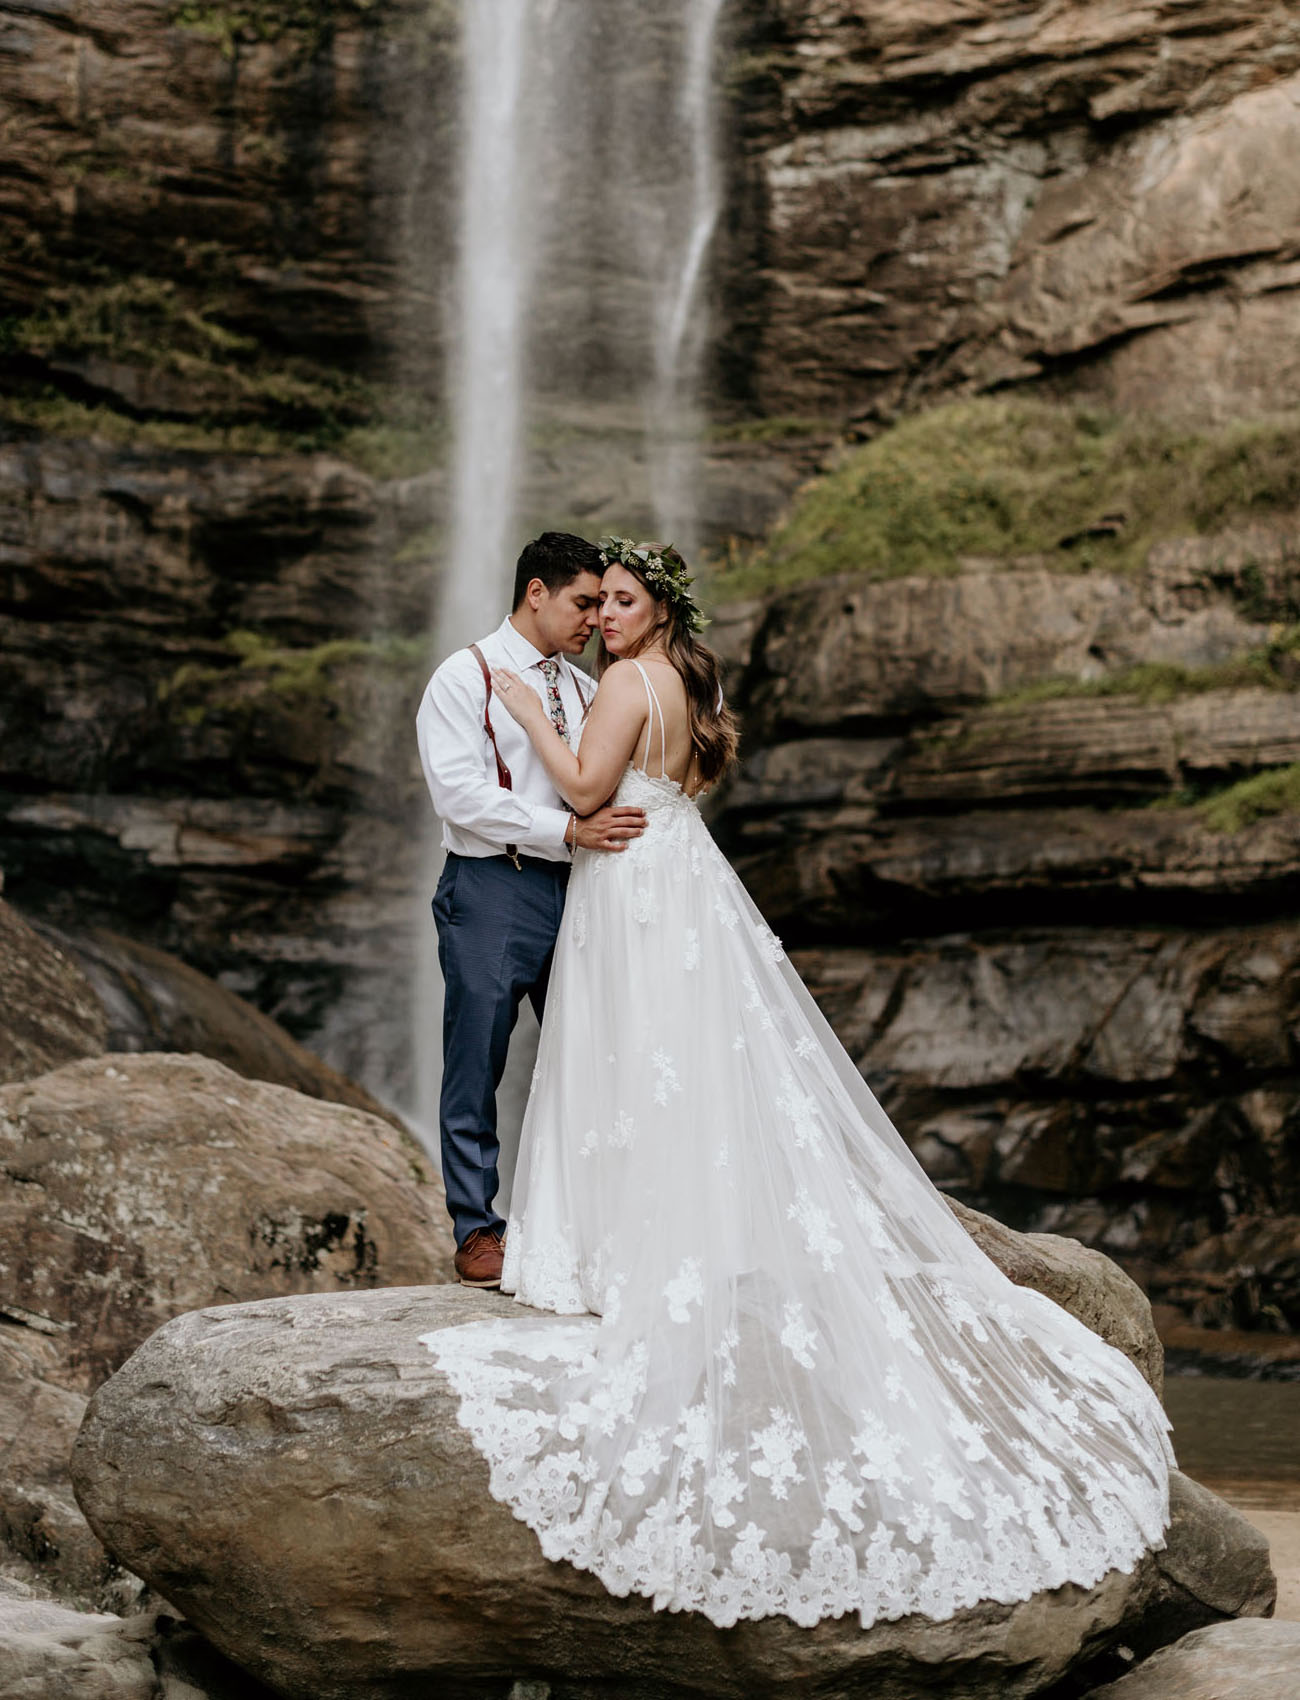 This wedding took place at a waterfall in North Georgia, the couple were enchanted by it